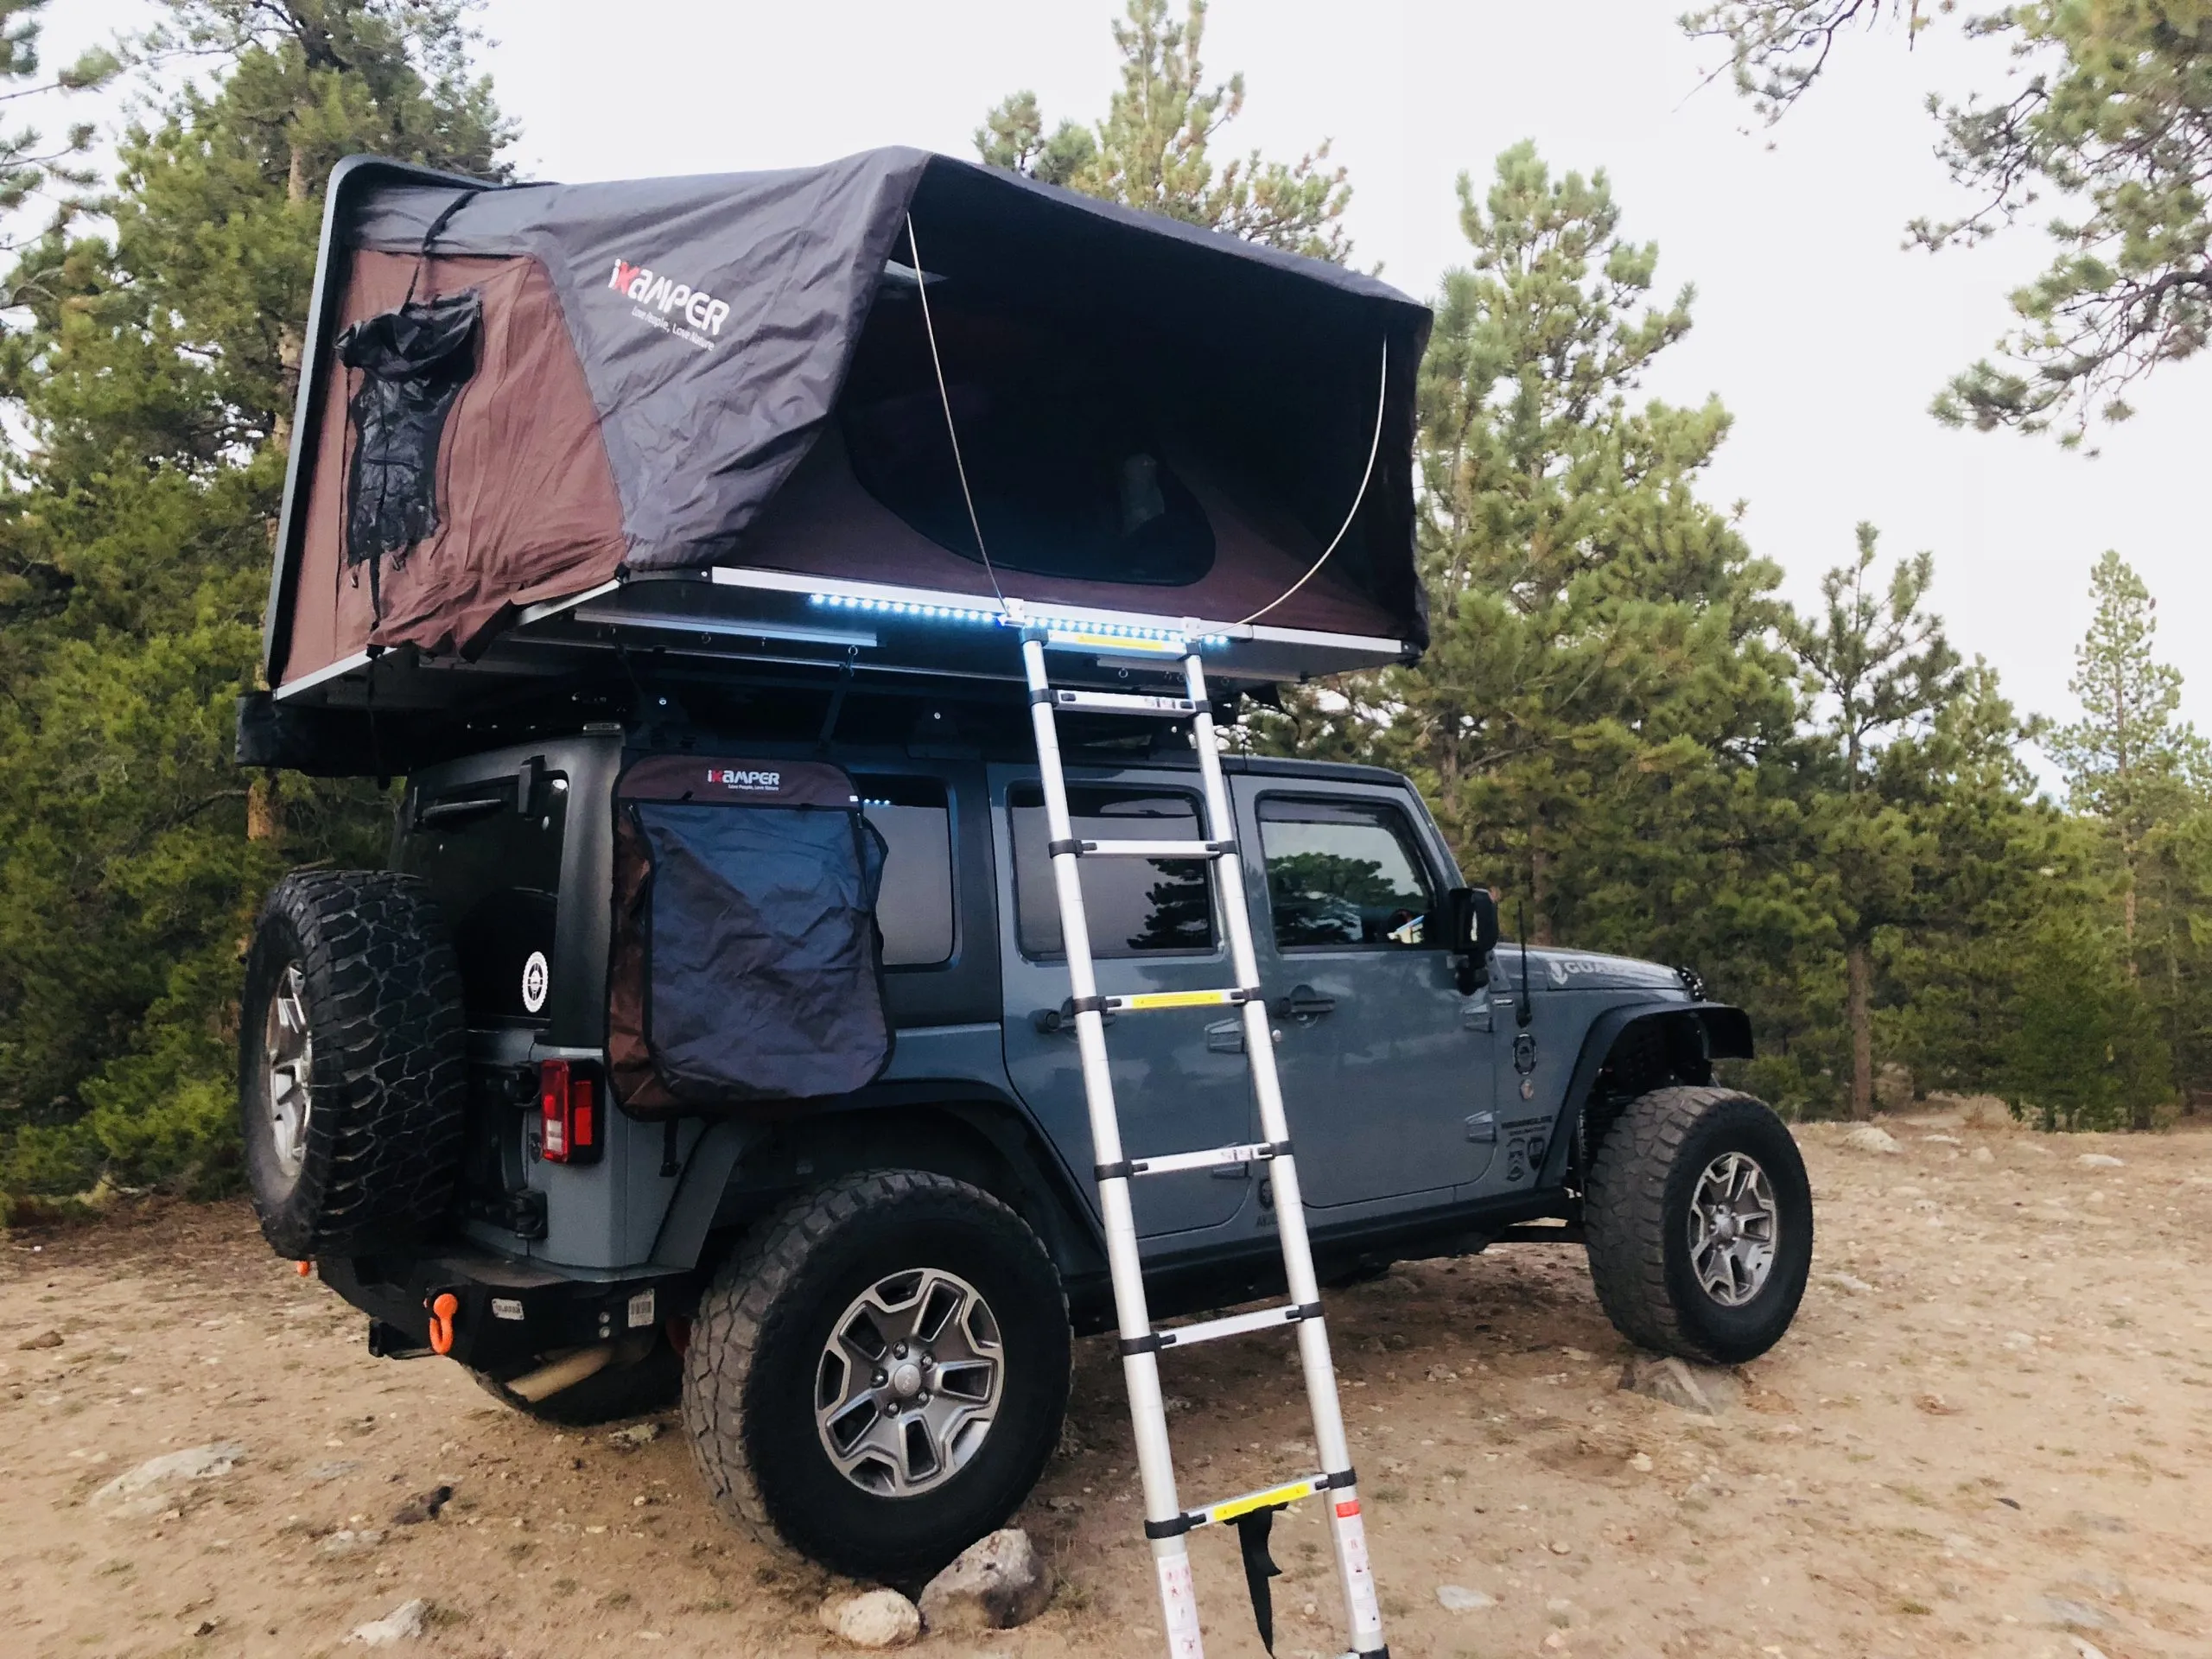 Neverending Story: Our Overlanding Jeep Build